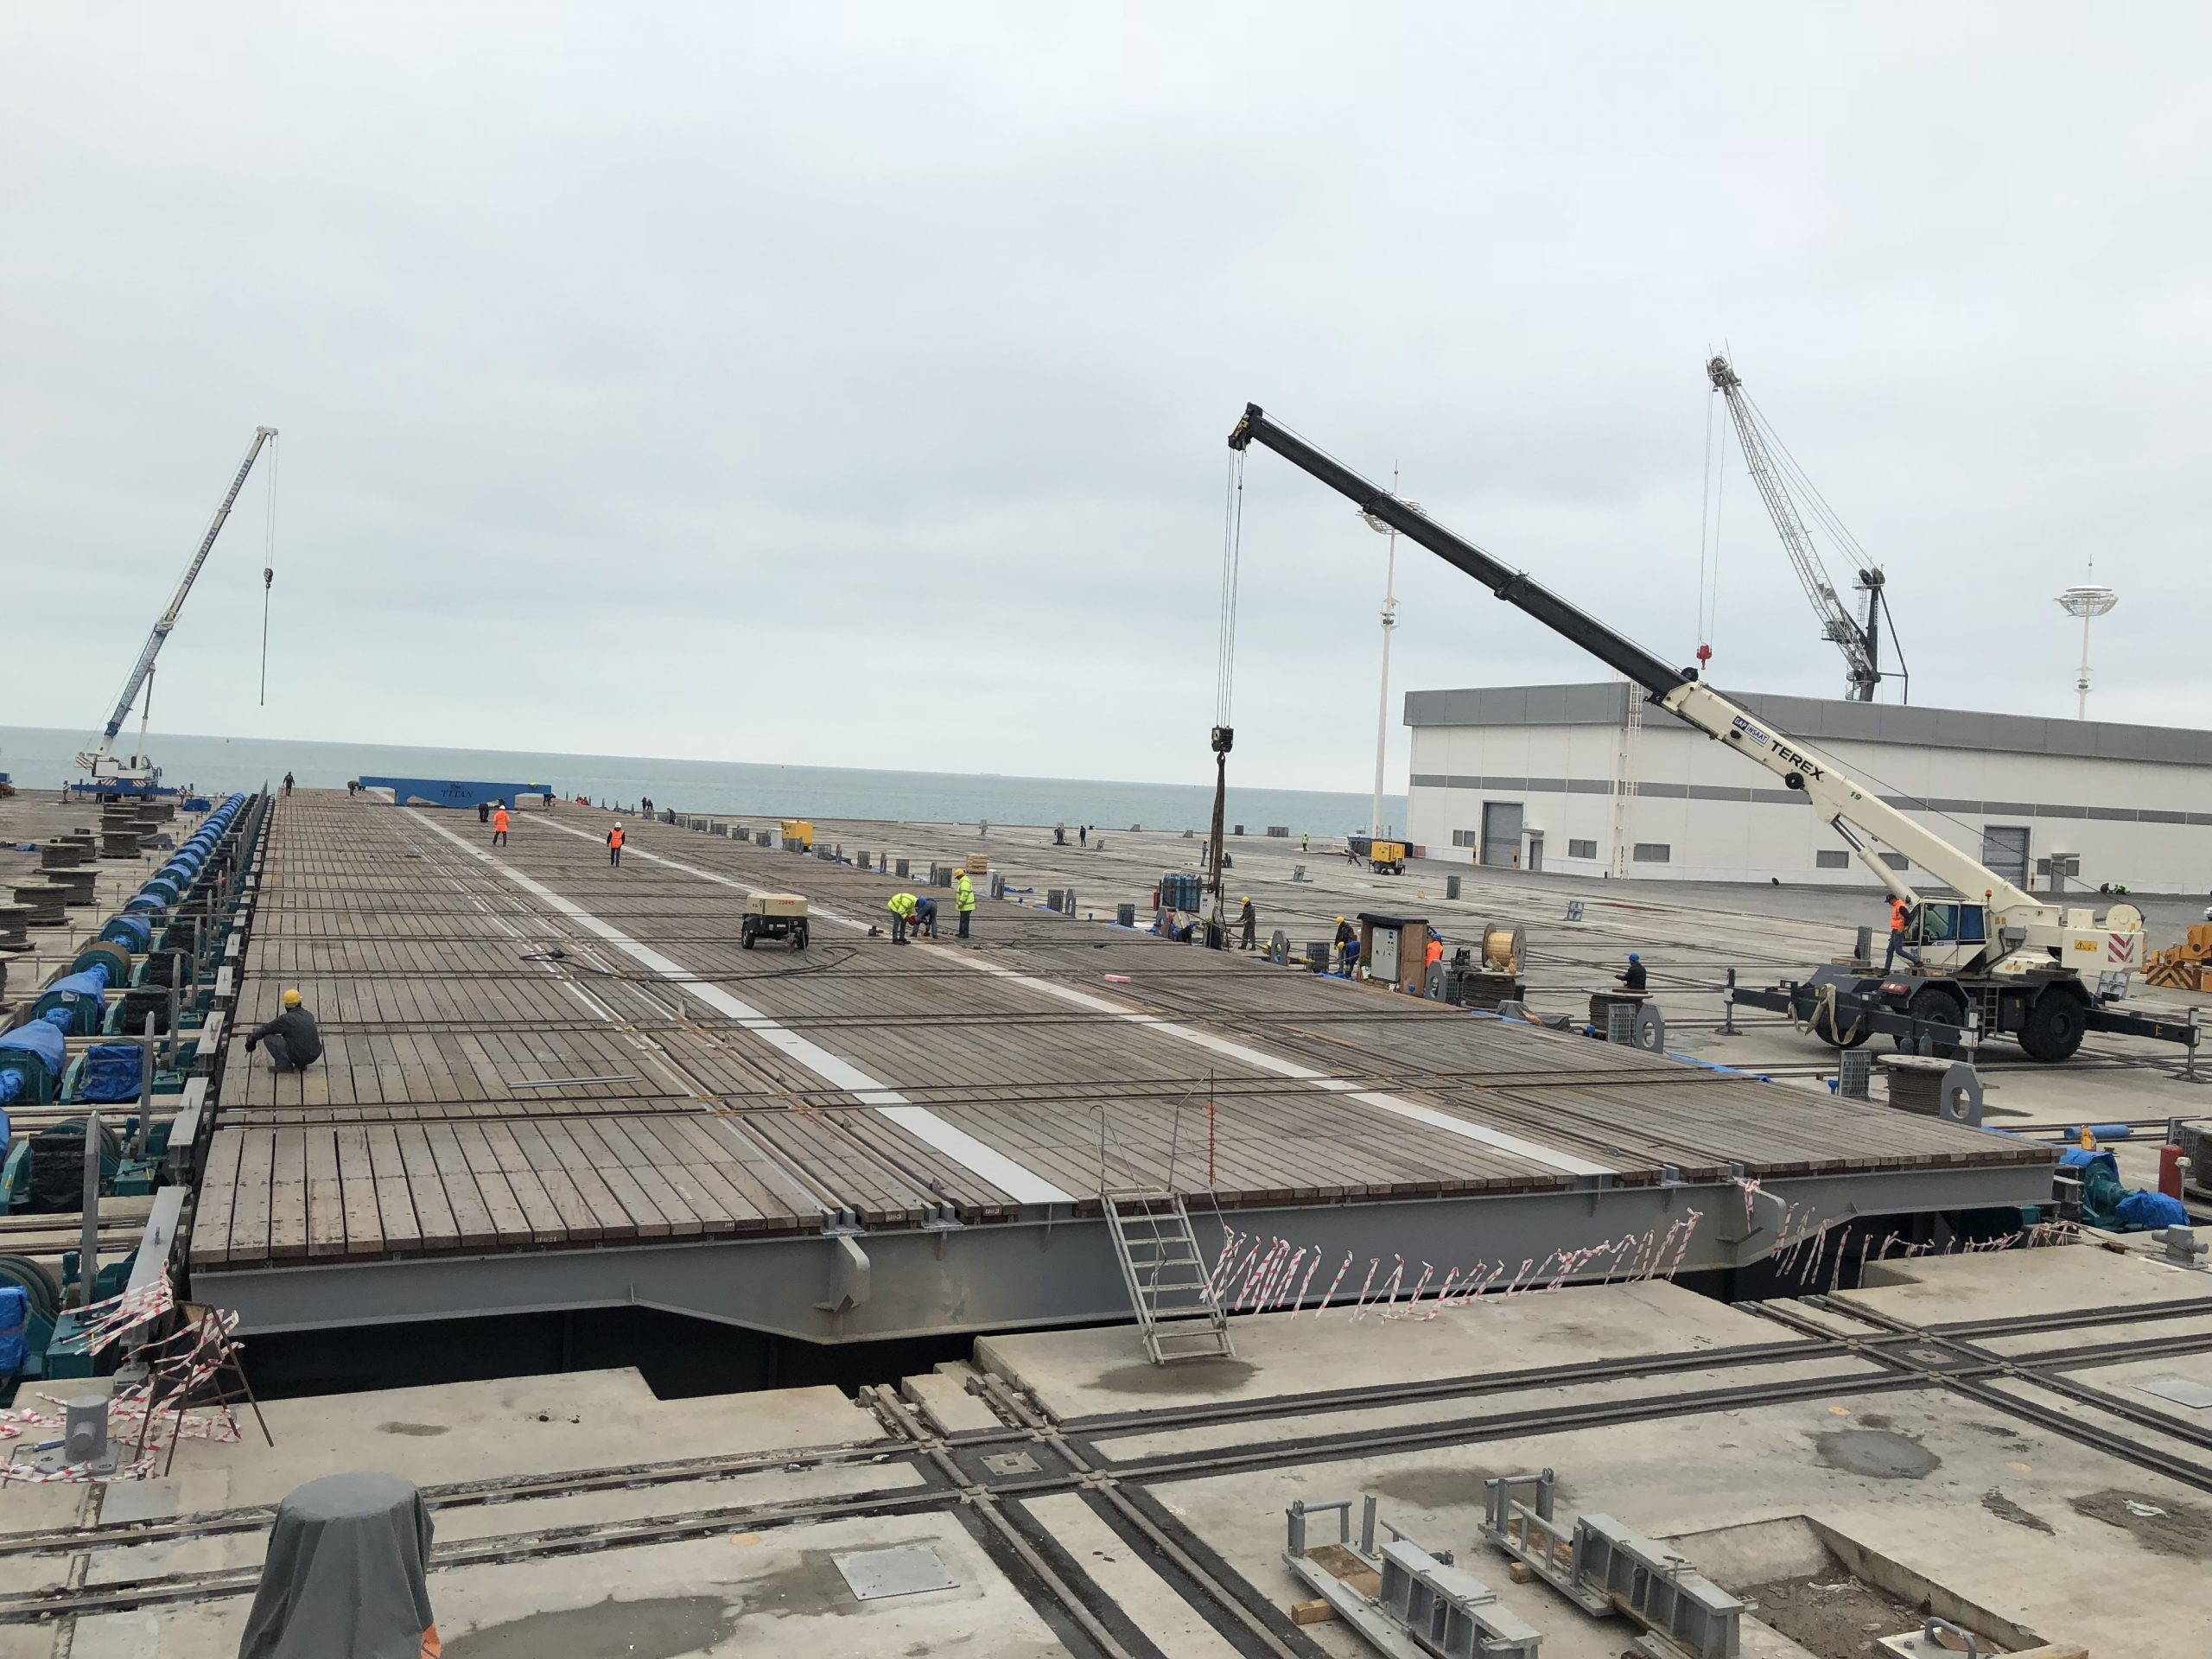 International Turkmenbashi Harbor Project – Shiplift Wood Covering , Rail Crossing Assembly and Welding Works